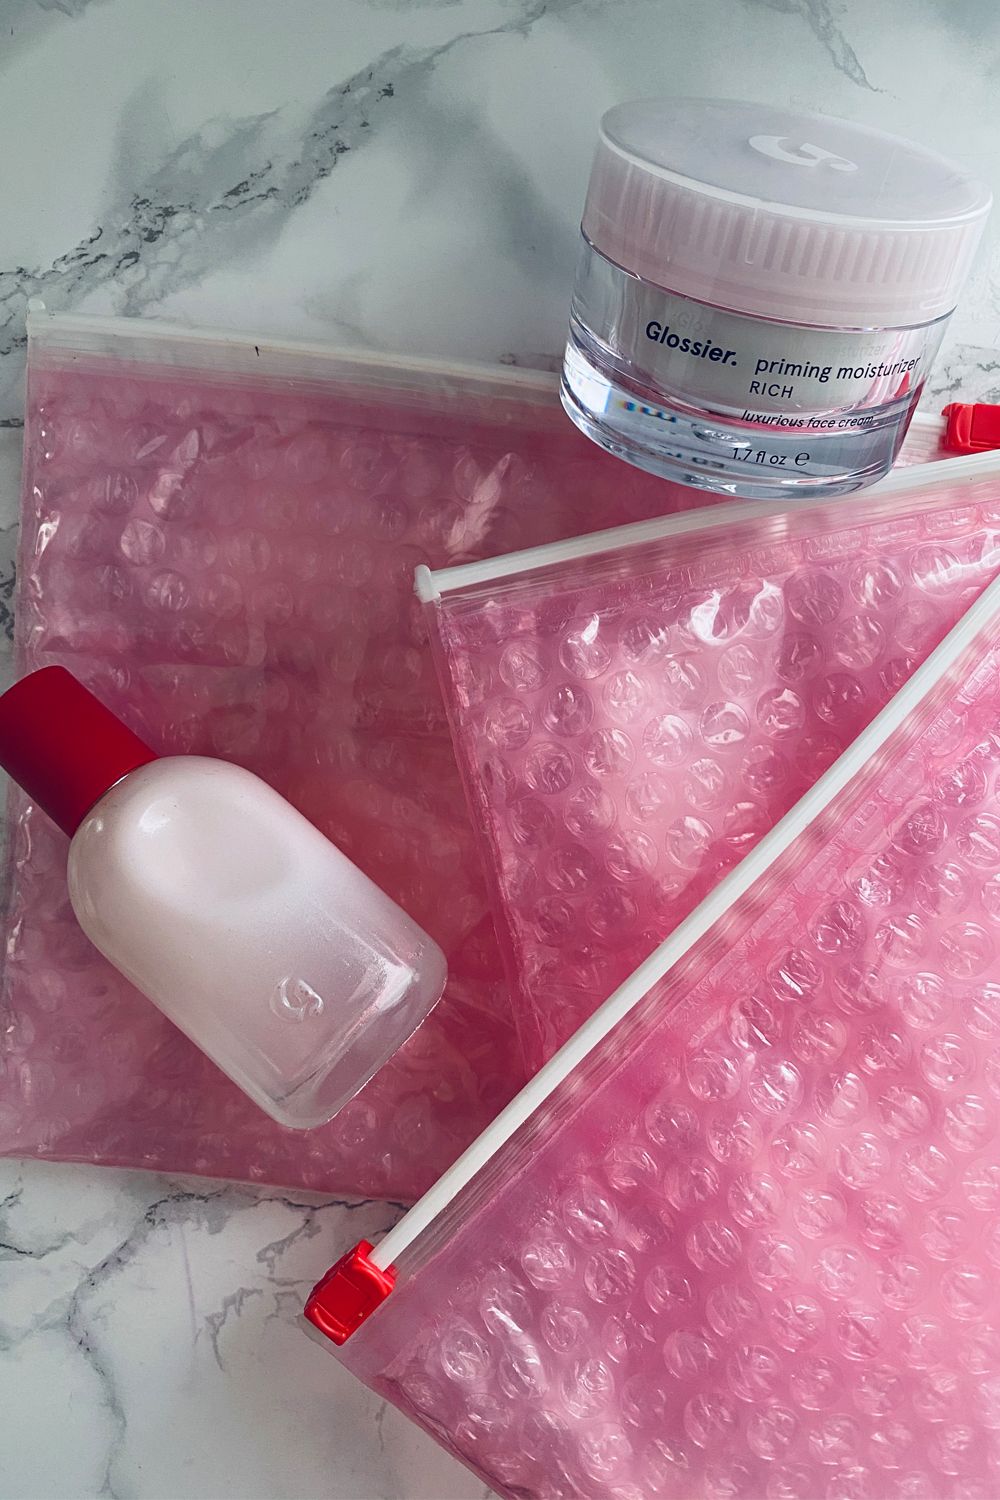 Glossier Priming Moisturizer Balance: Glossier products